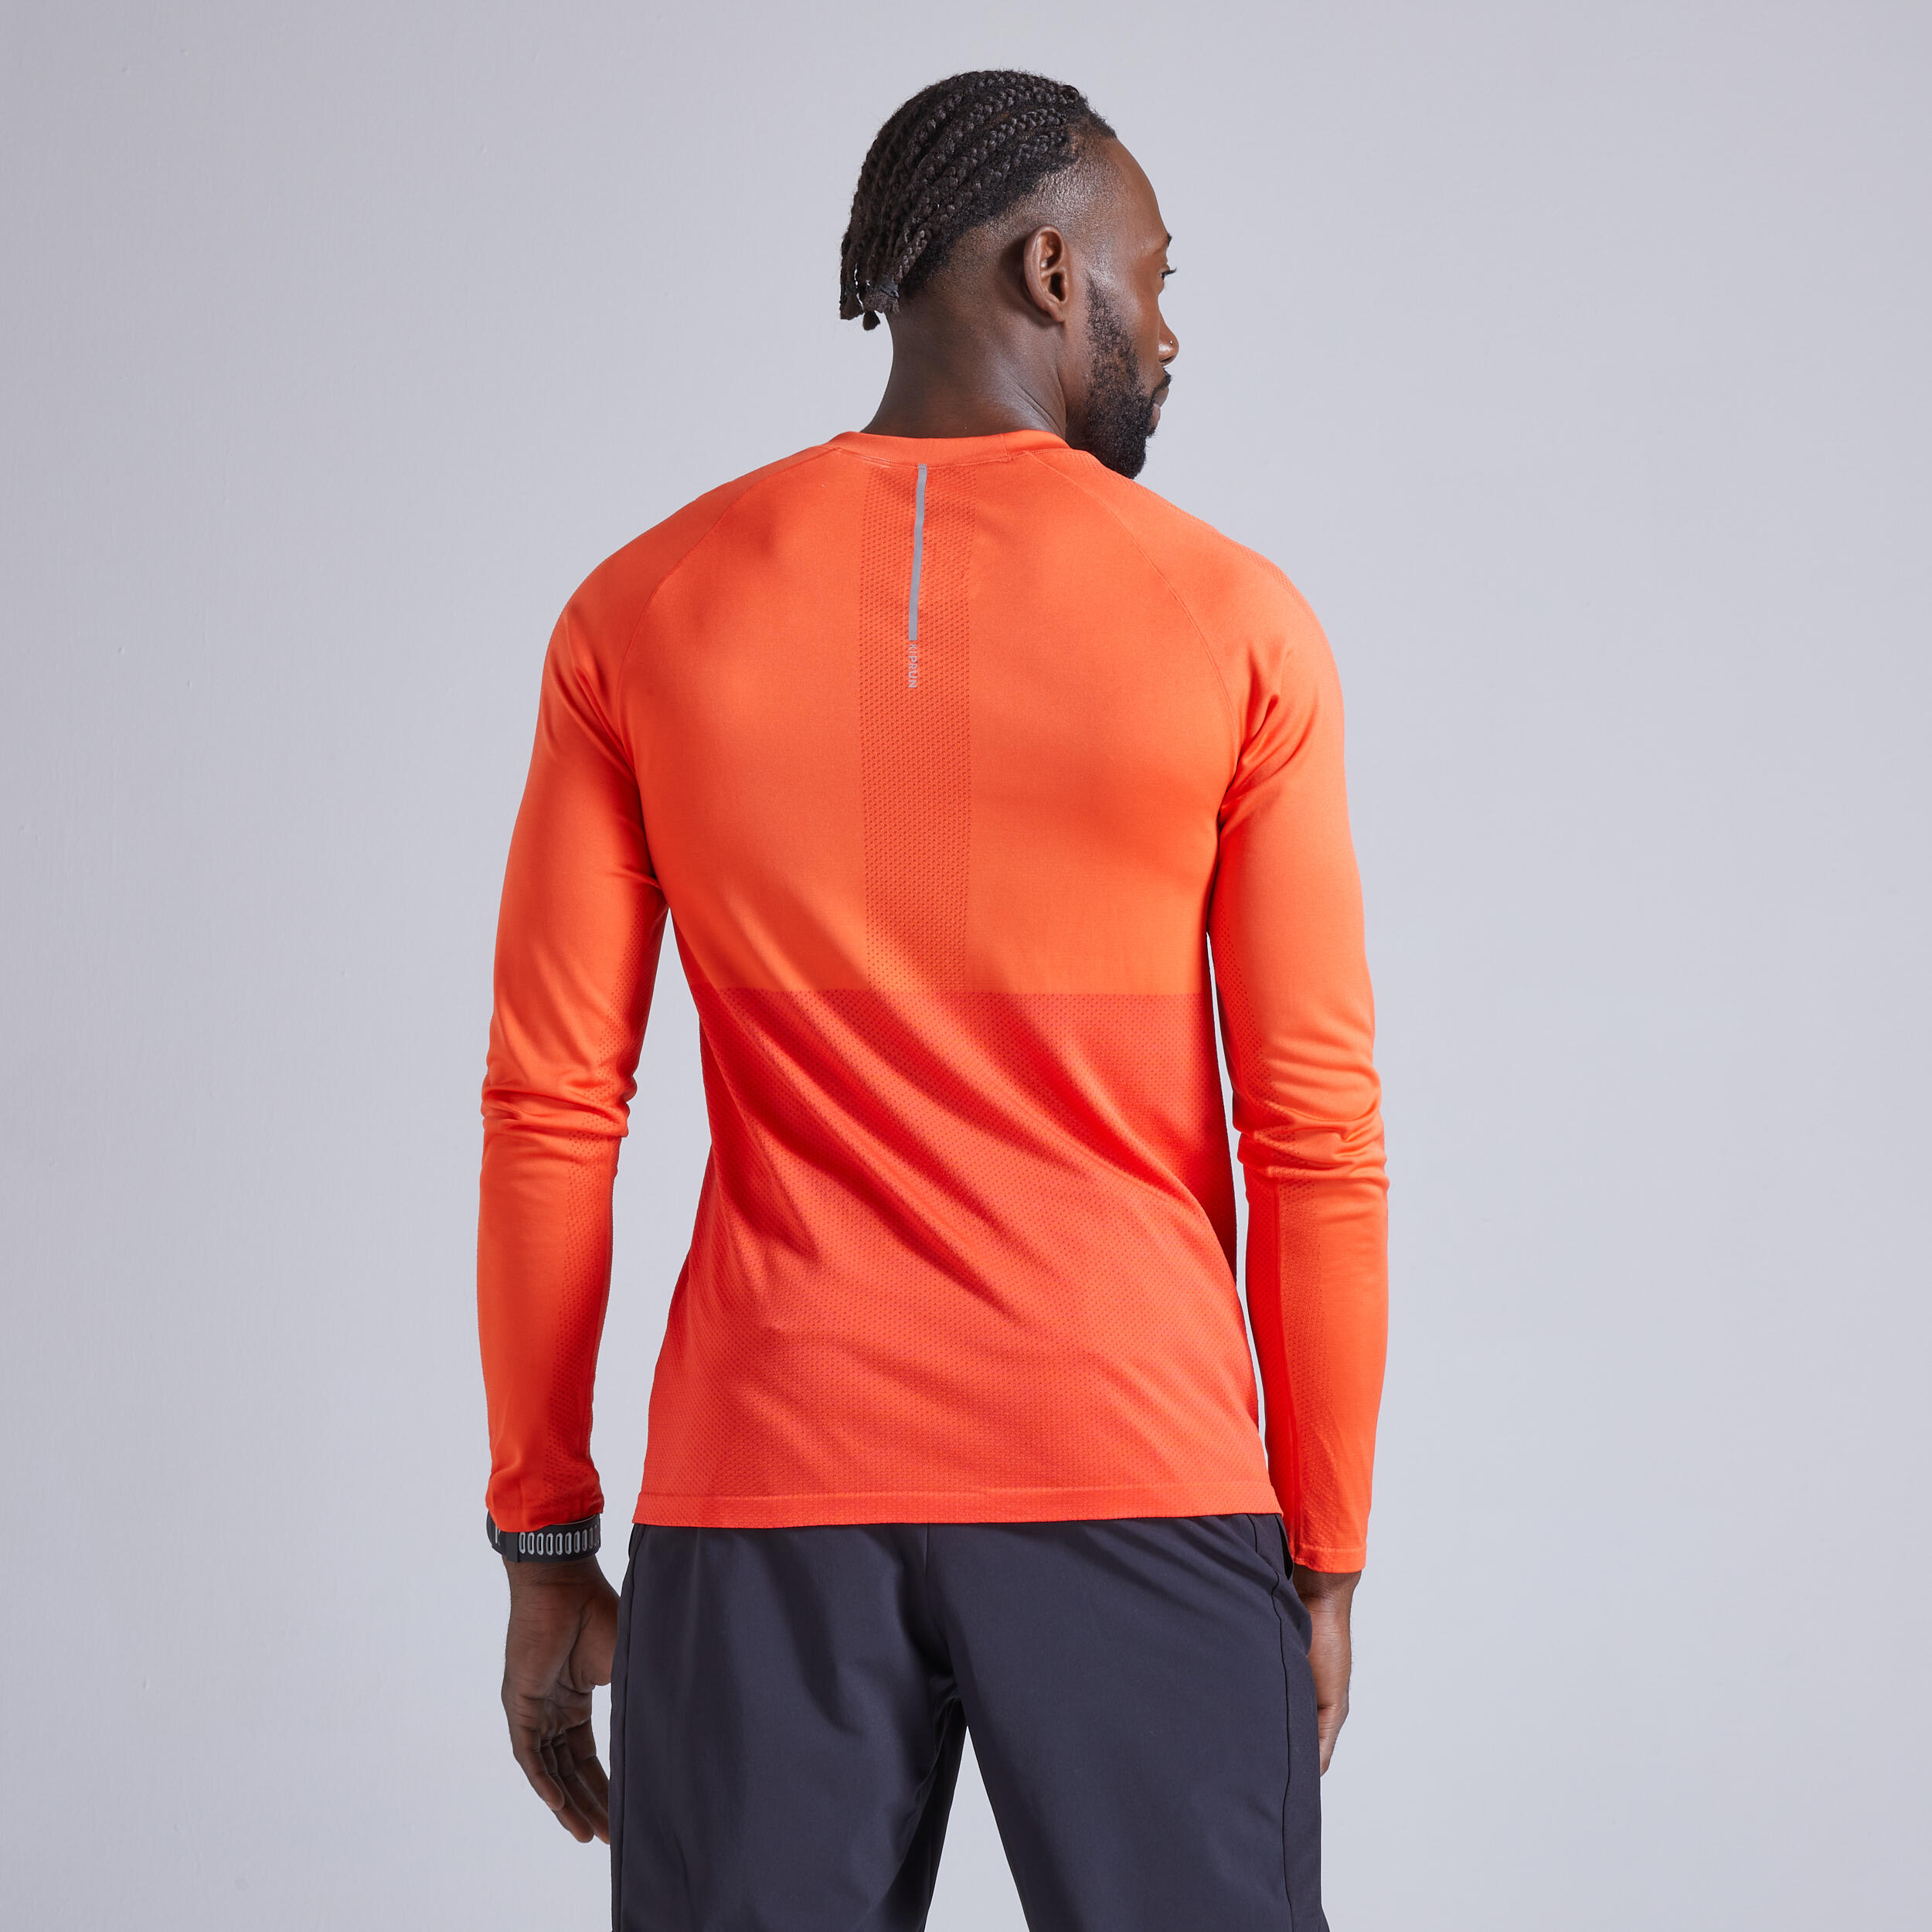 T-SHIRT RUNNING HOMME RESPIRANT MANCHE LONGUE CARE  EDITION LIMITEE 5/11